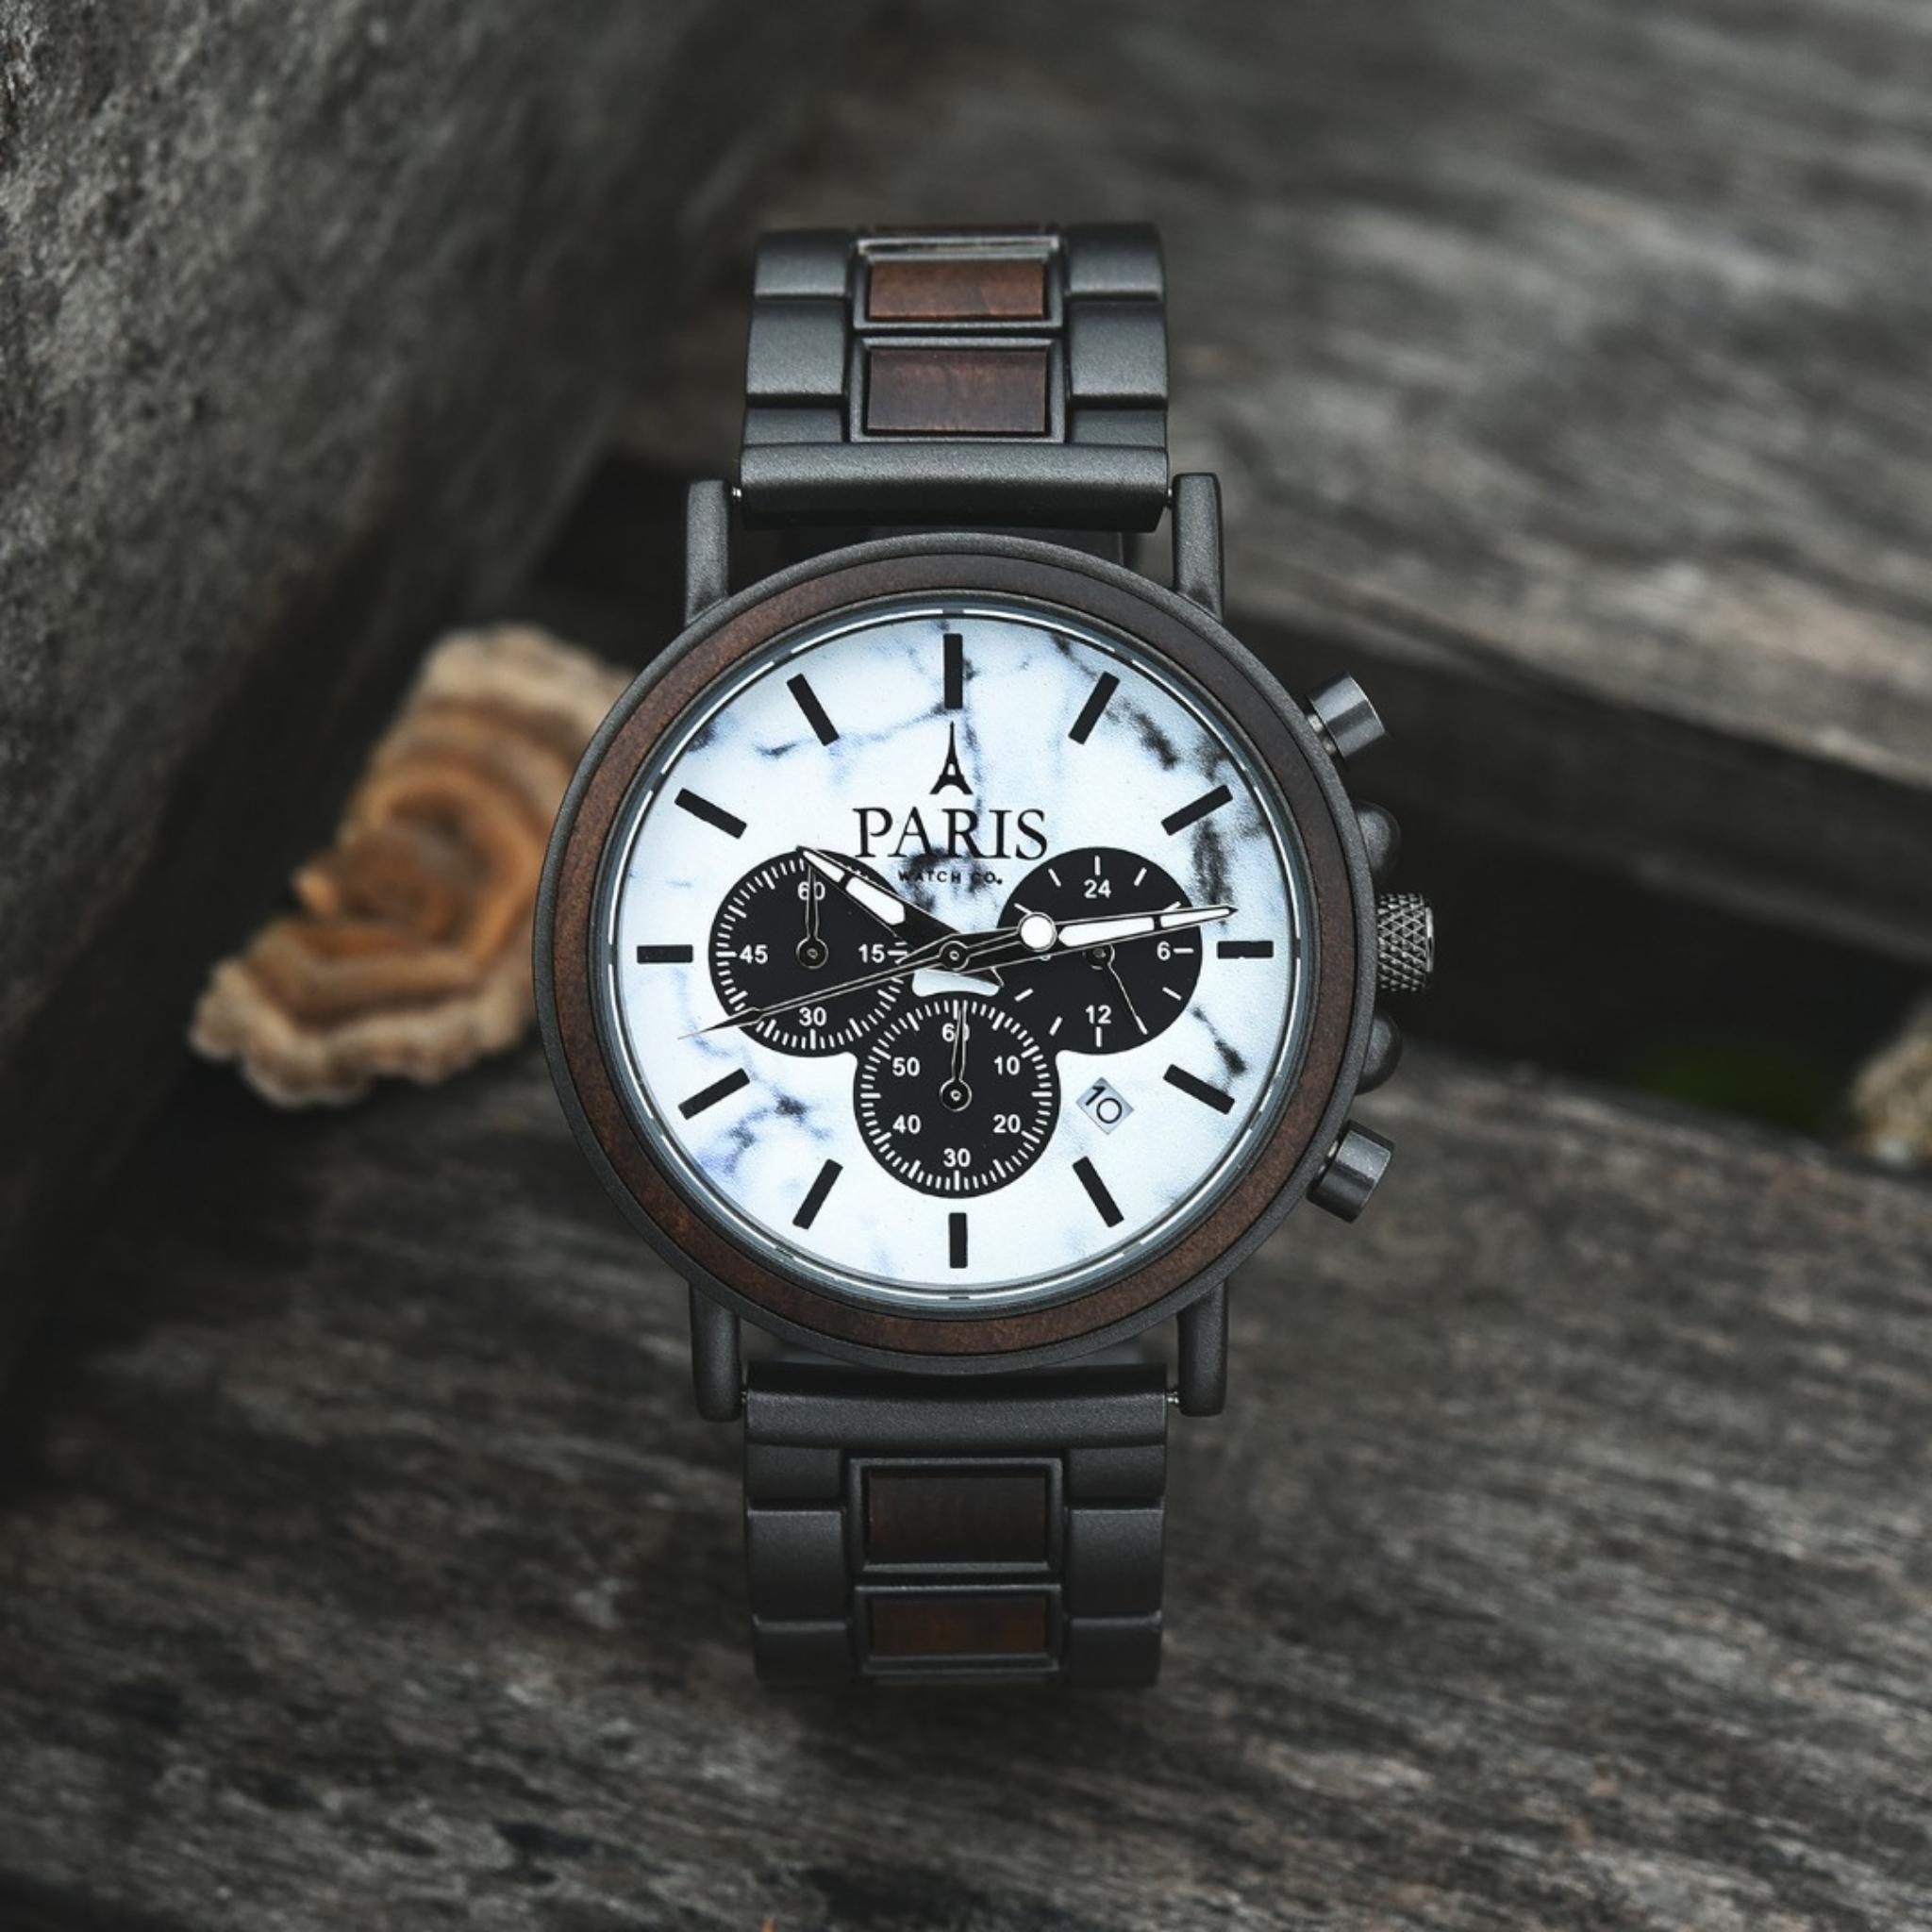 Marble Charcoal - Paris Watch Company